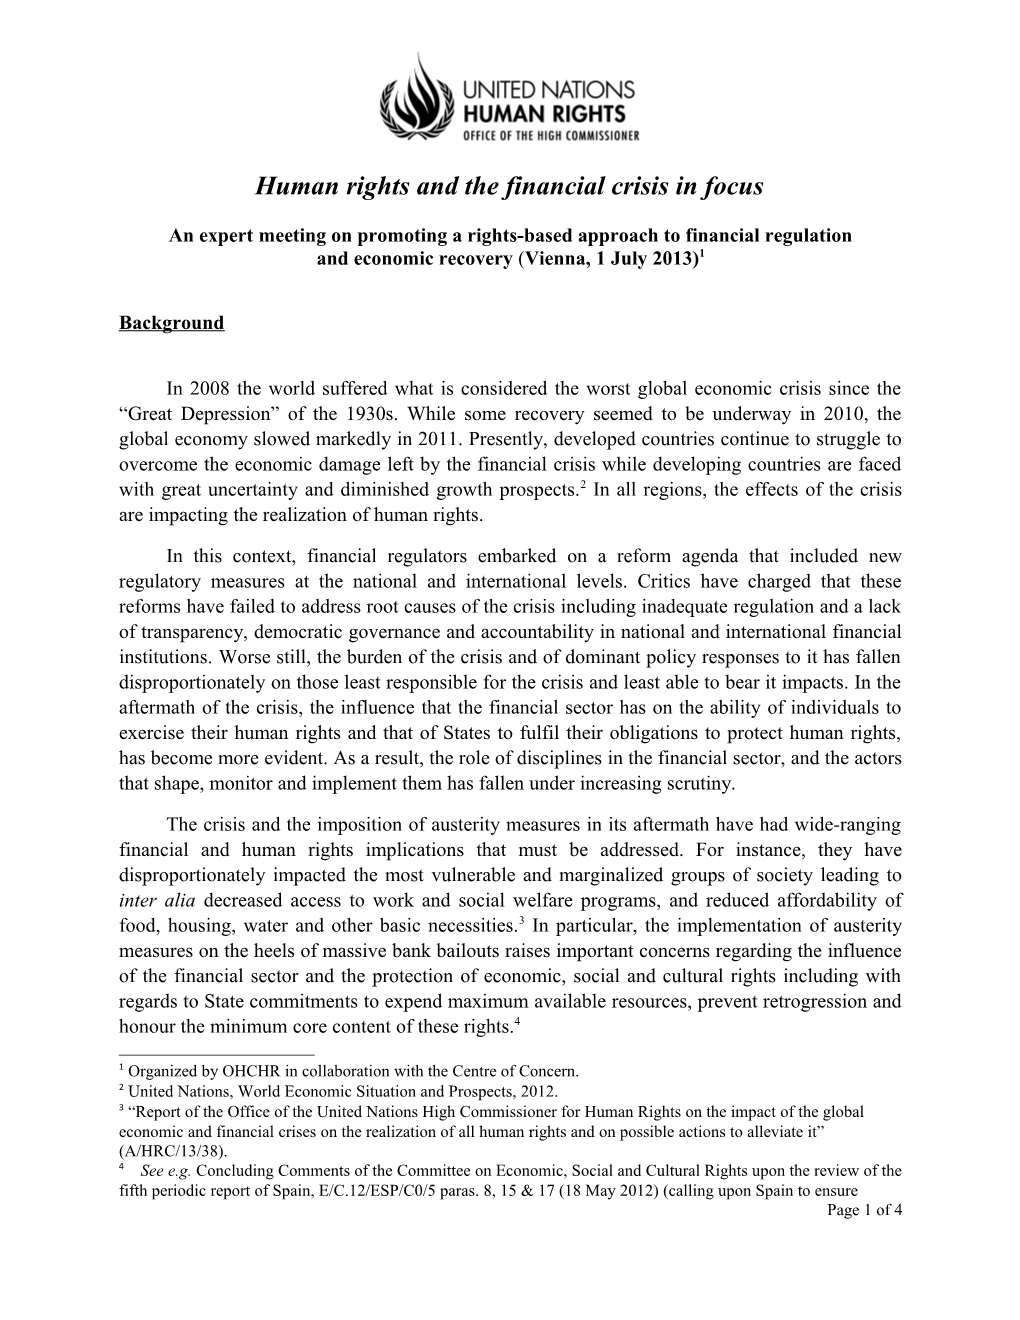 Human Rights and the Financial Crisis in Focus